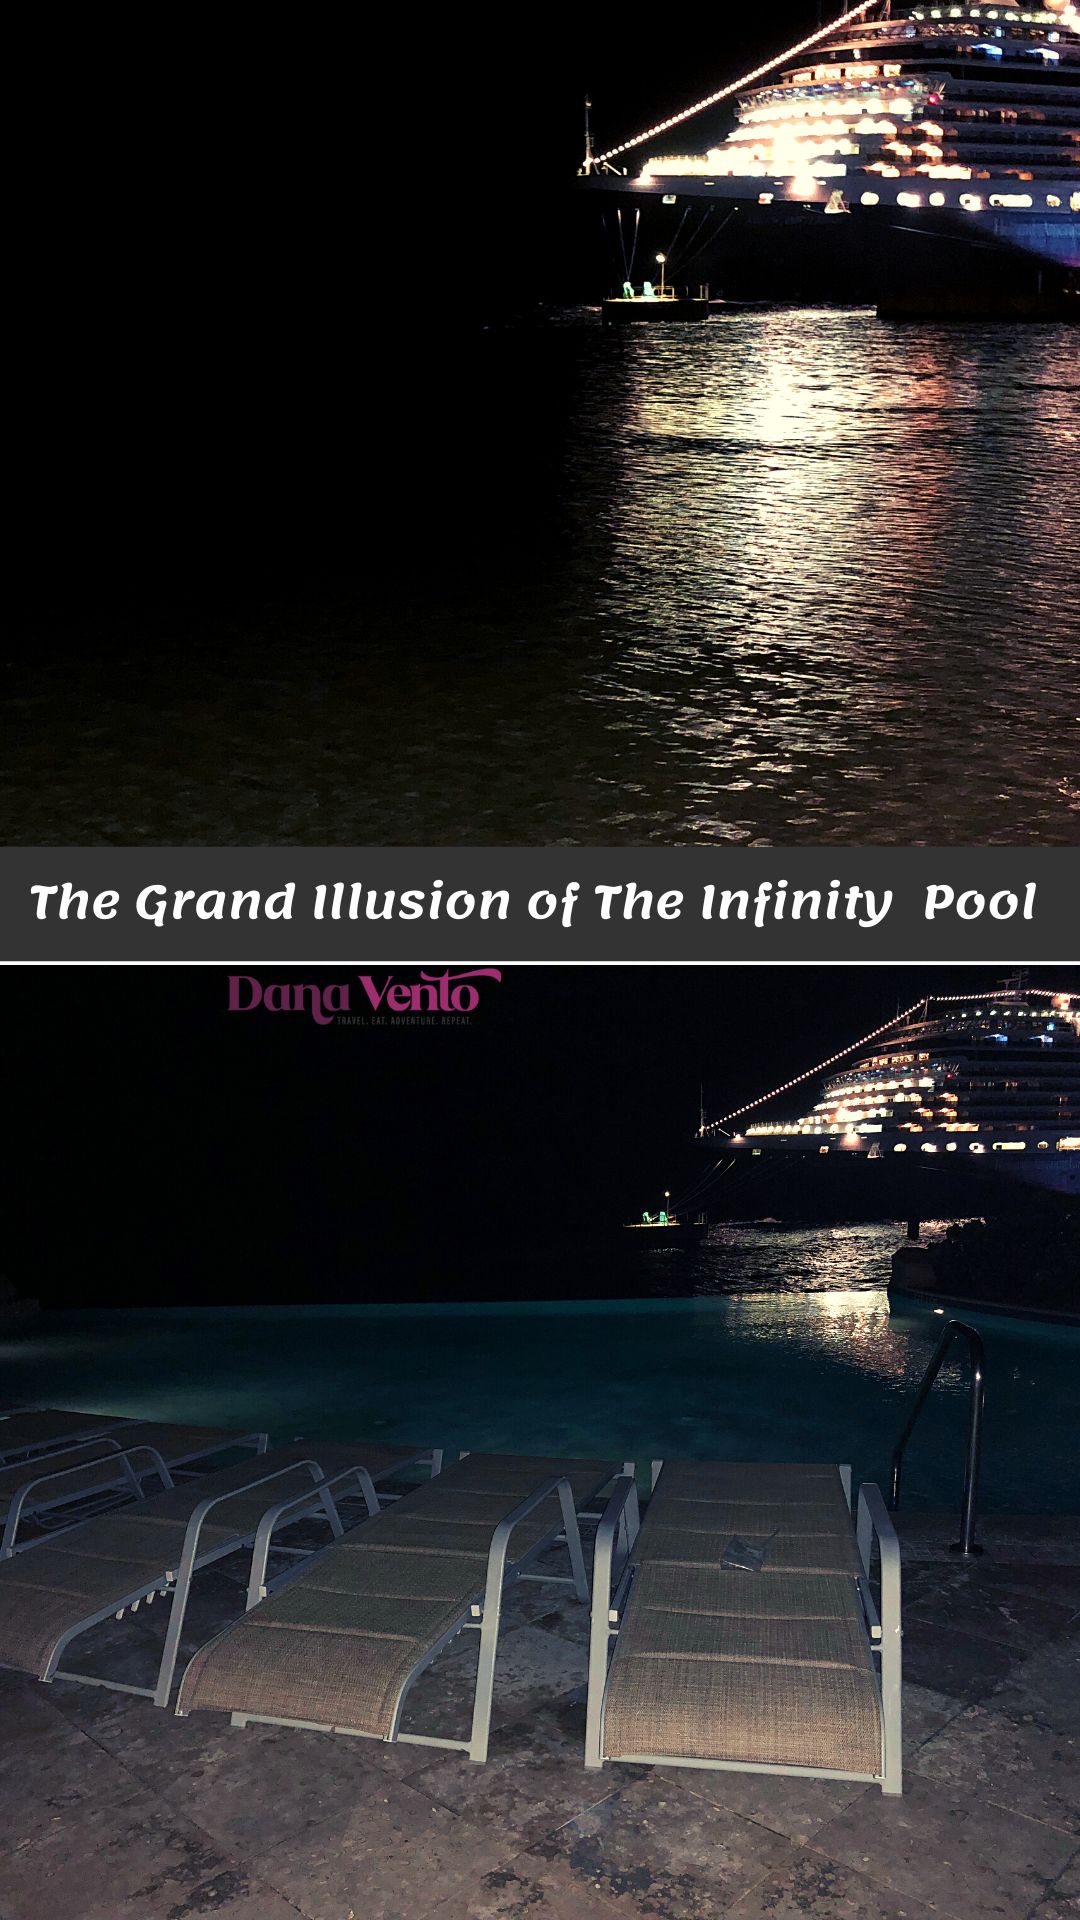 Discover Willemstad Curacao on Foot - the infinity pool 